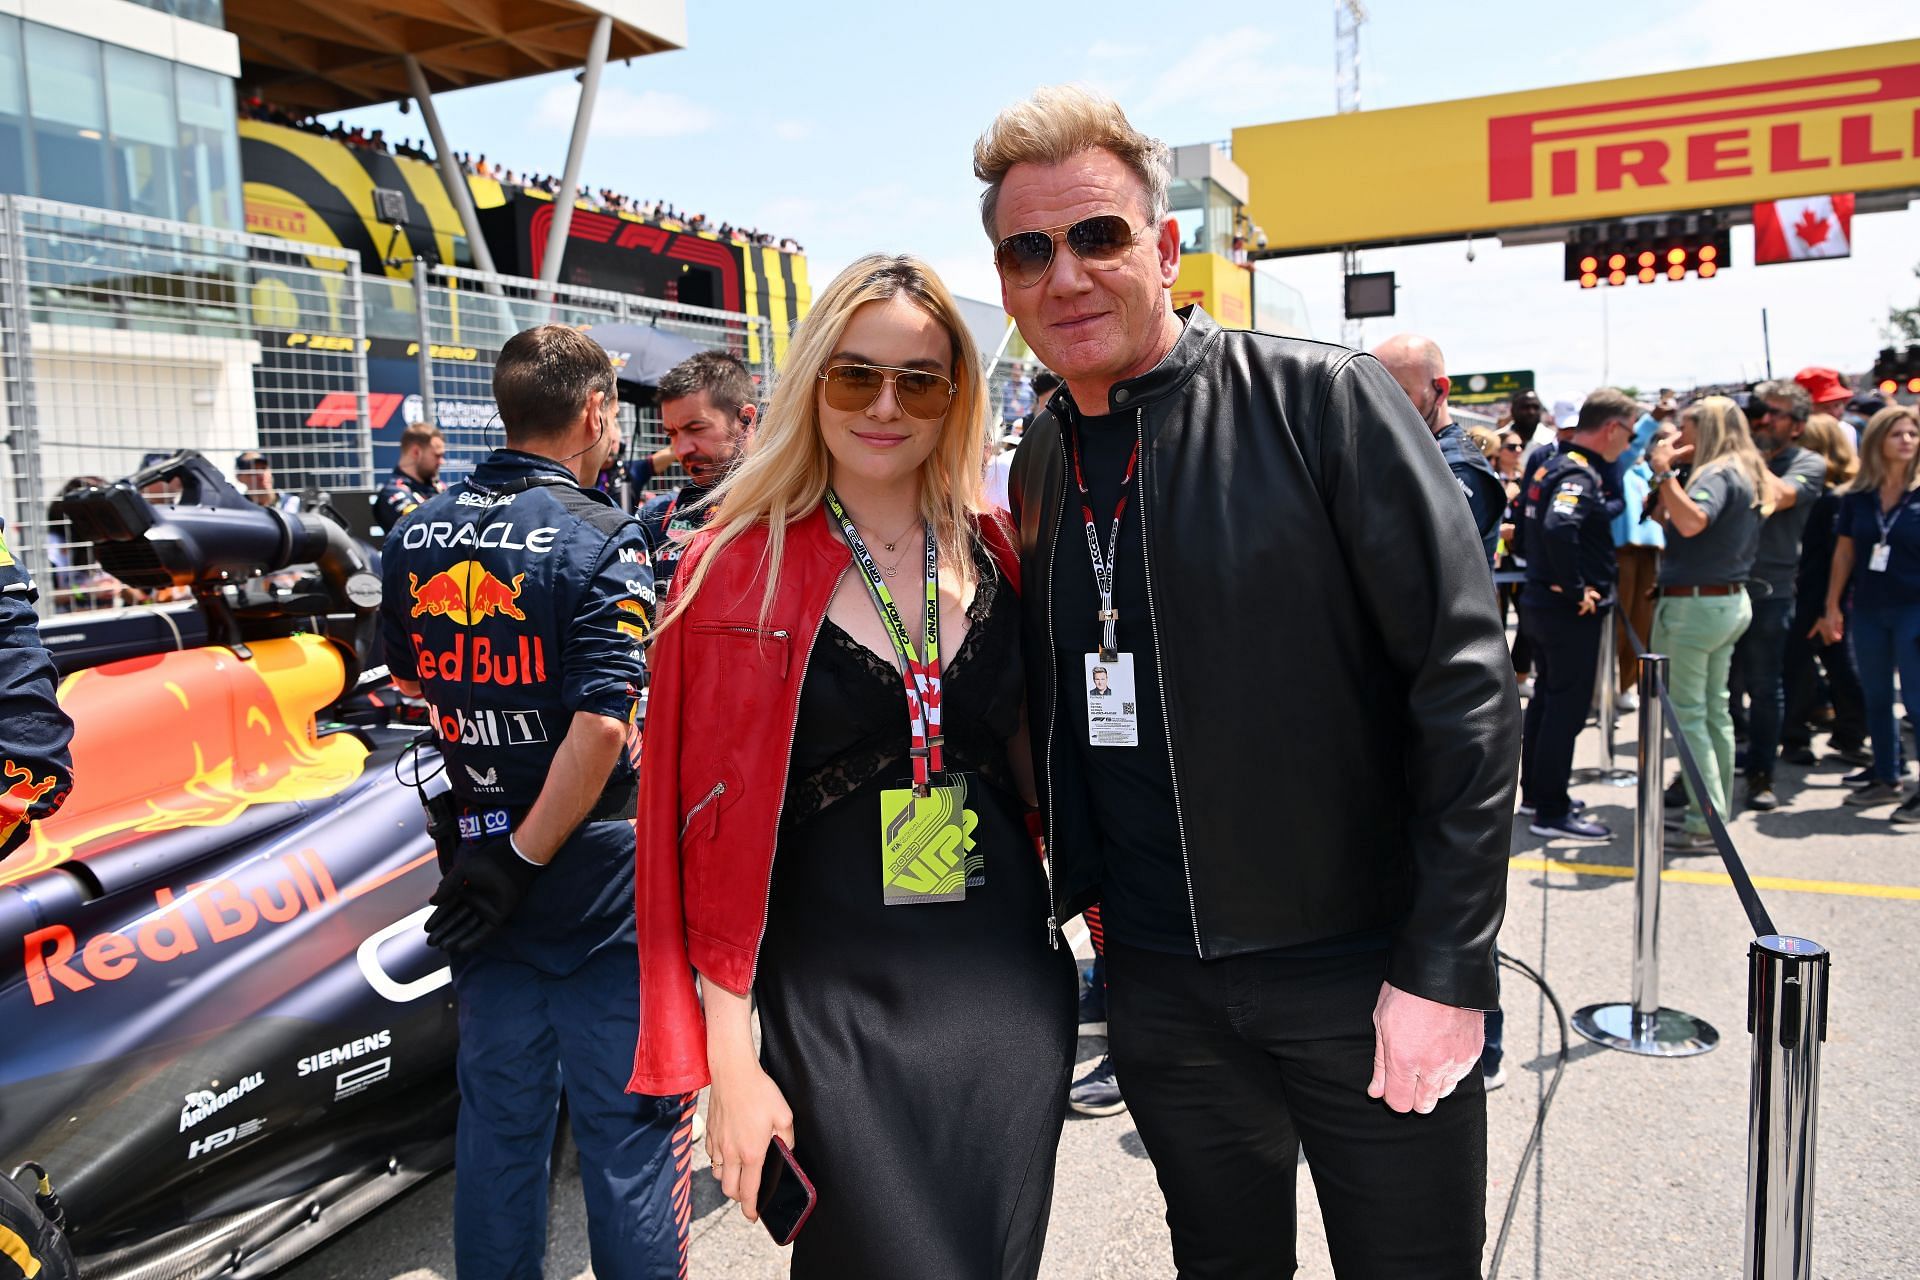 Gordon Ramsay with daughter Holly Ramsay posing with the Red Bull RB19 (Photo by Dan Mullan/Getty Images)